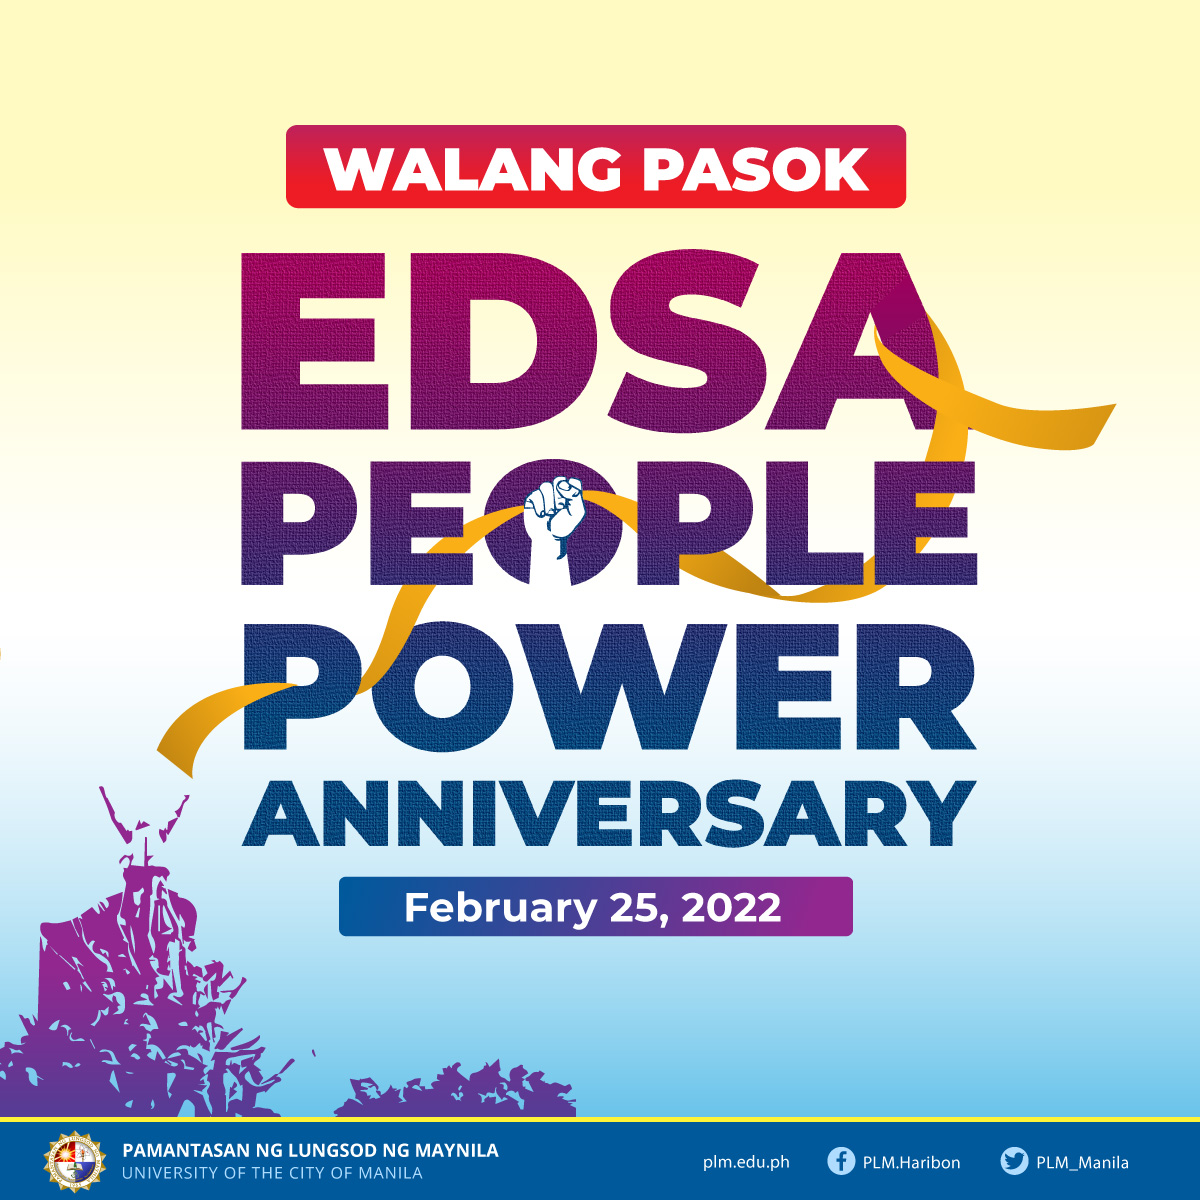 Classes, work suspended on Feb. 25, 2022